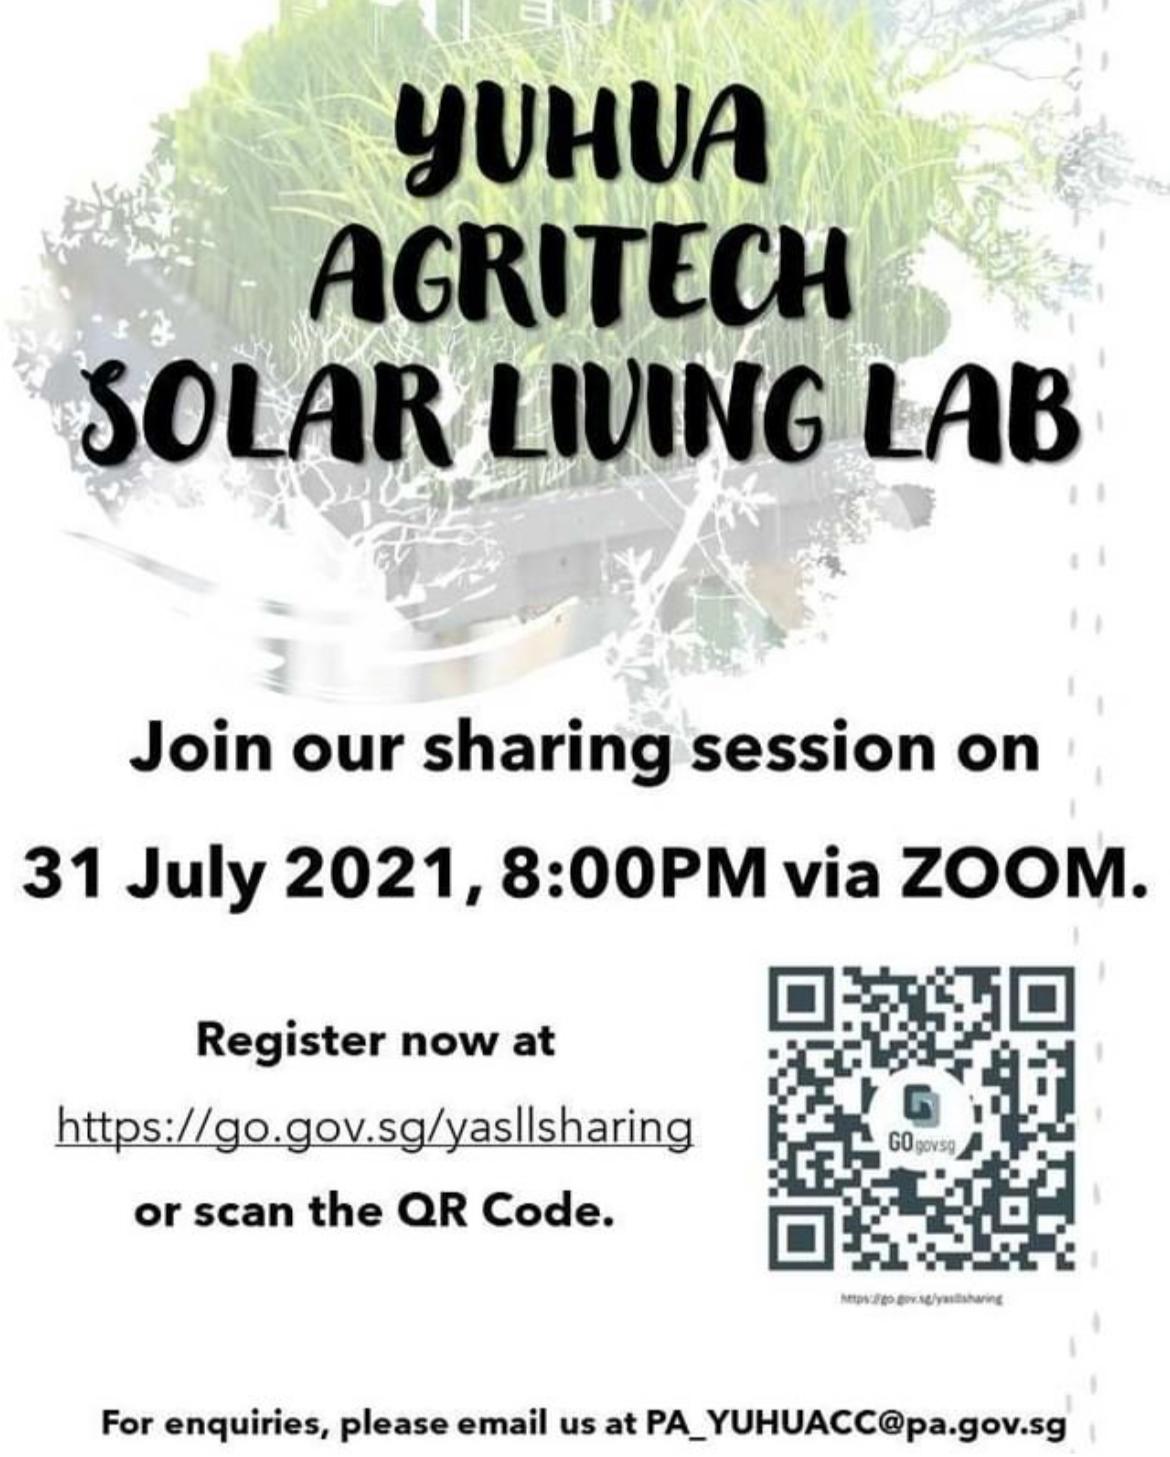 Zoom Sharing Session on Yuhua Agritech Solar Living Lab's Banner Image